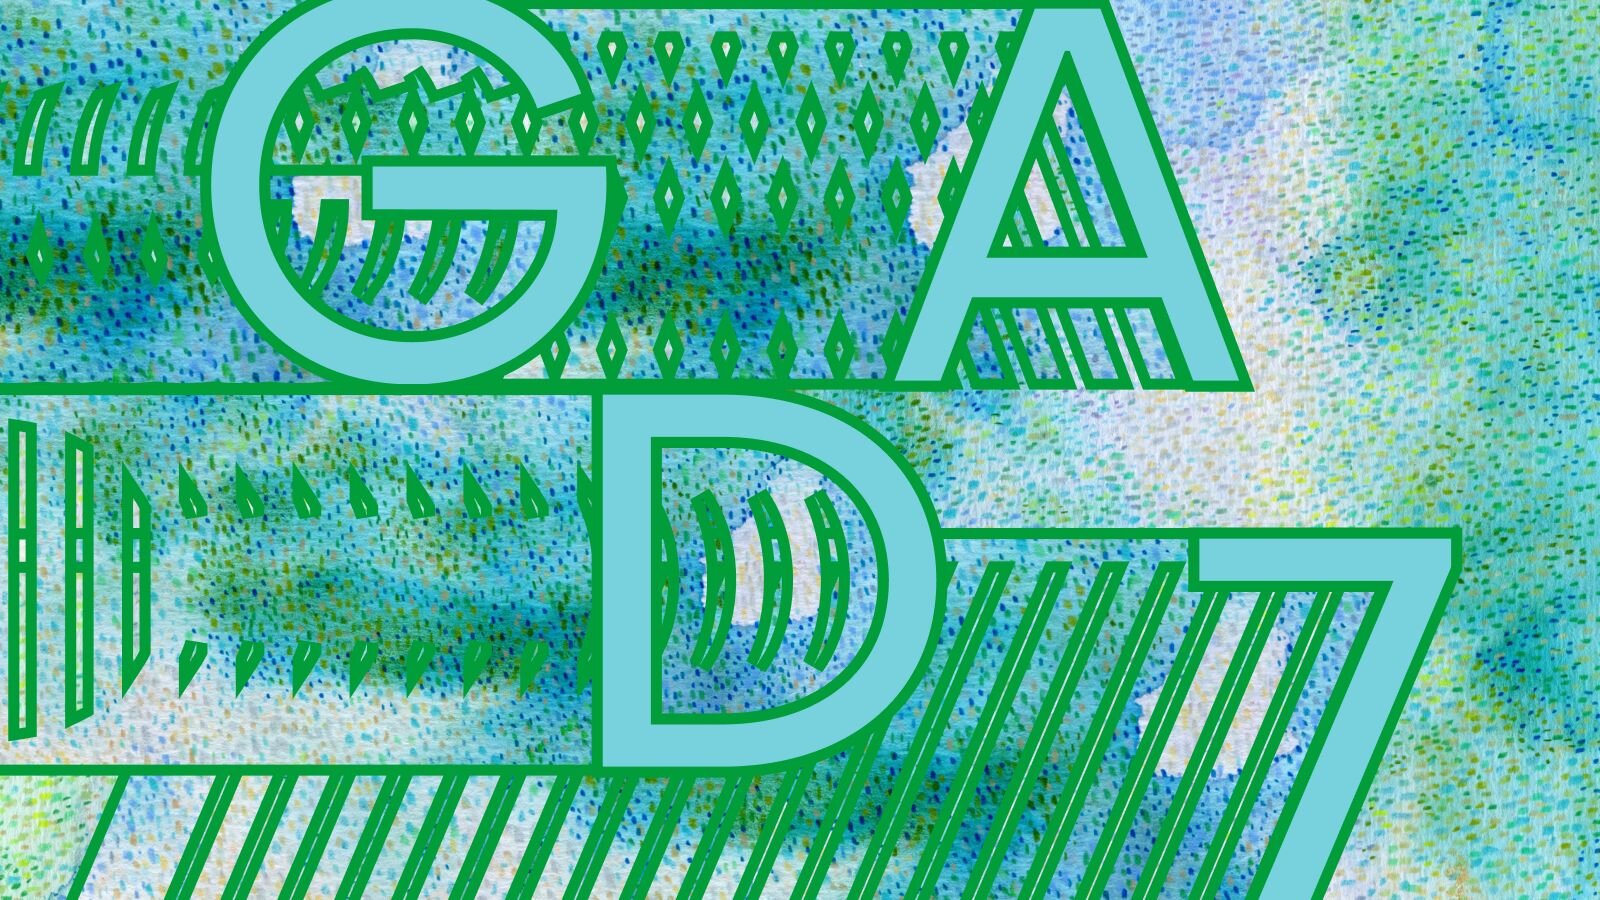 An illustration of the abbreviation "GAD-7" on a watercolor background.